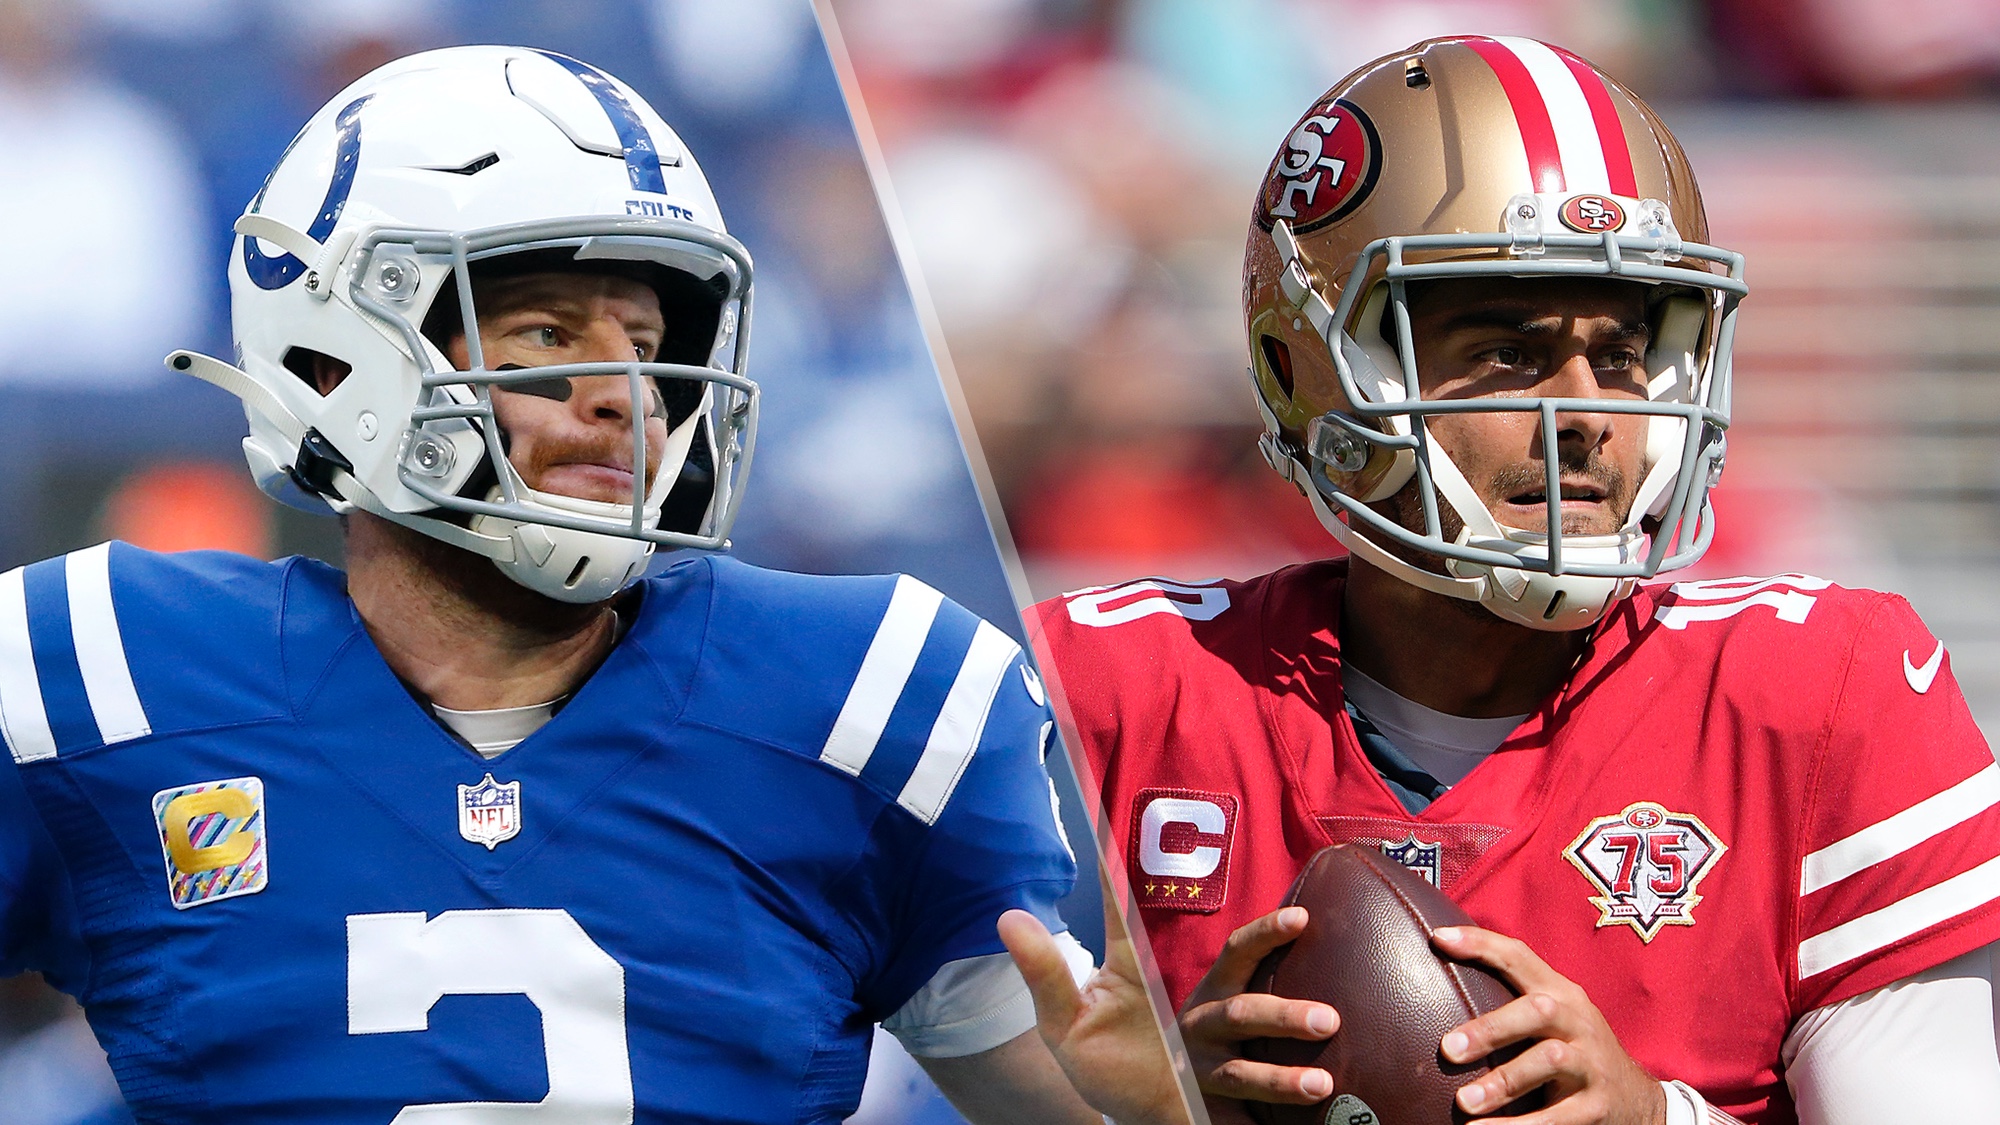 Colts vs 49ers live stream: How to watch Sunday Night Football online